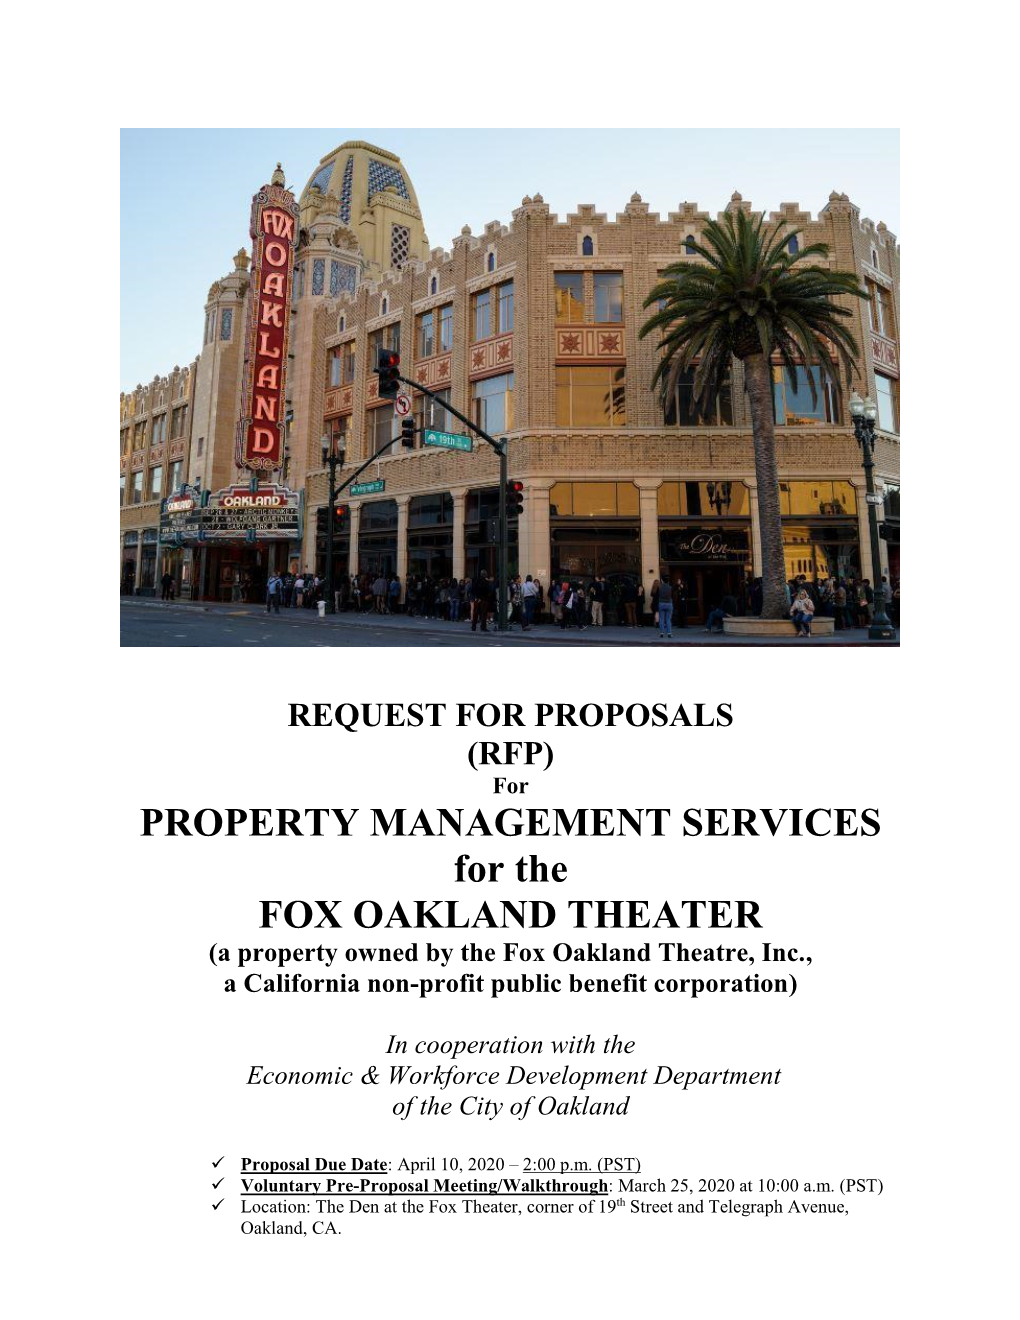 RFP for Property Management for Fox Theater